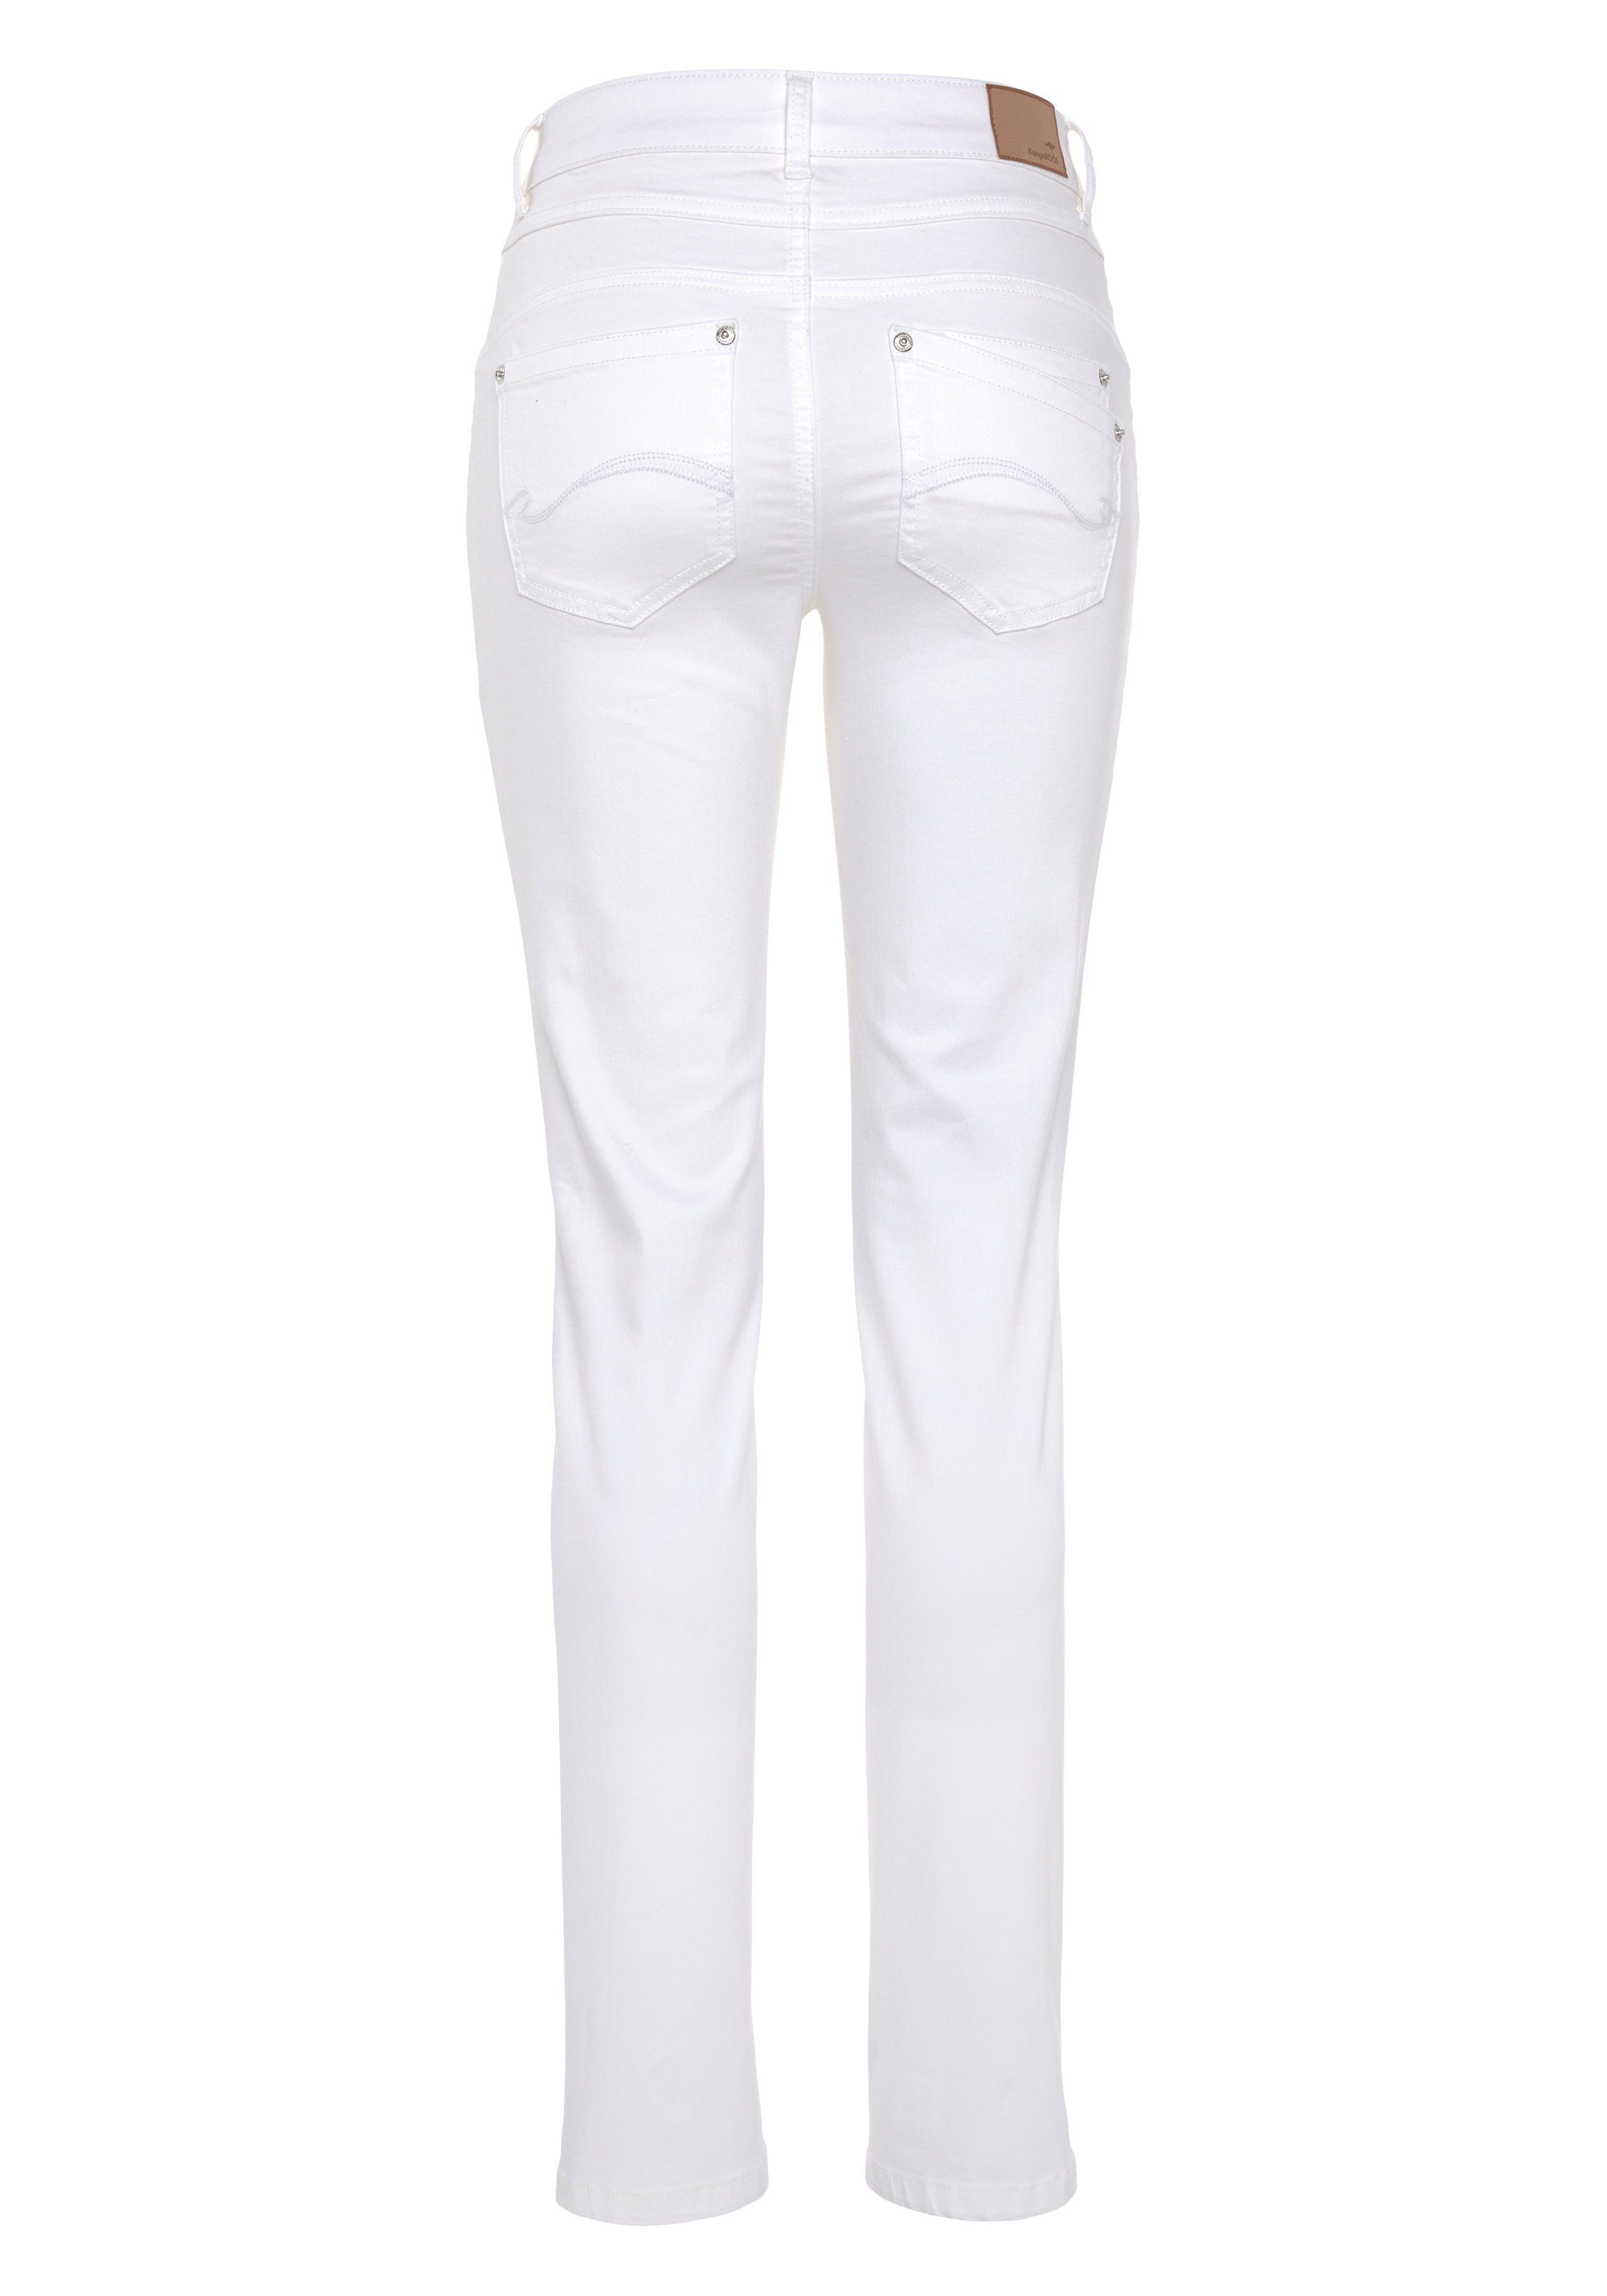 KangaROOS Relax-fit-Jeans WAIST RELAX-FIT HIGH white